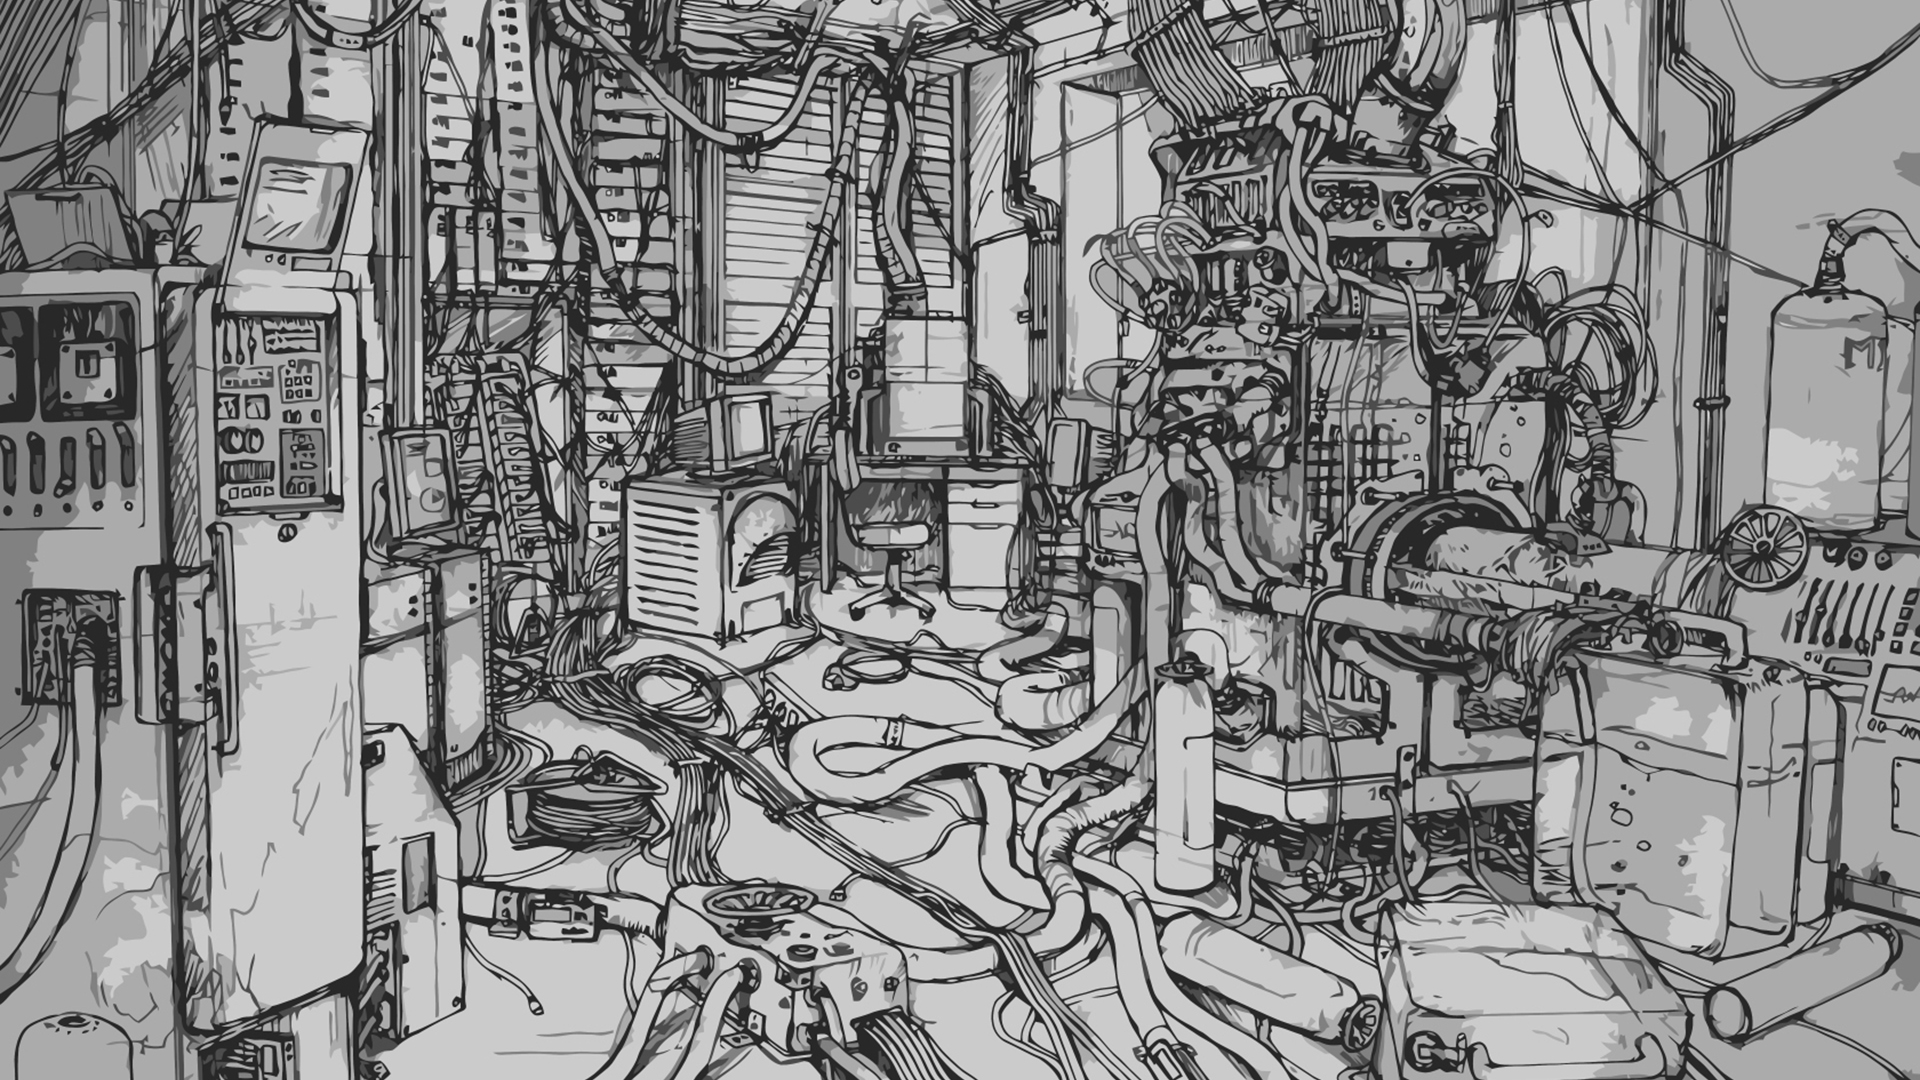 Anime 1920x1080 Serial Experiments Lain wires artwork technology monochrome cyberpunk drawing gray